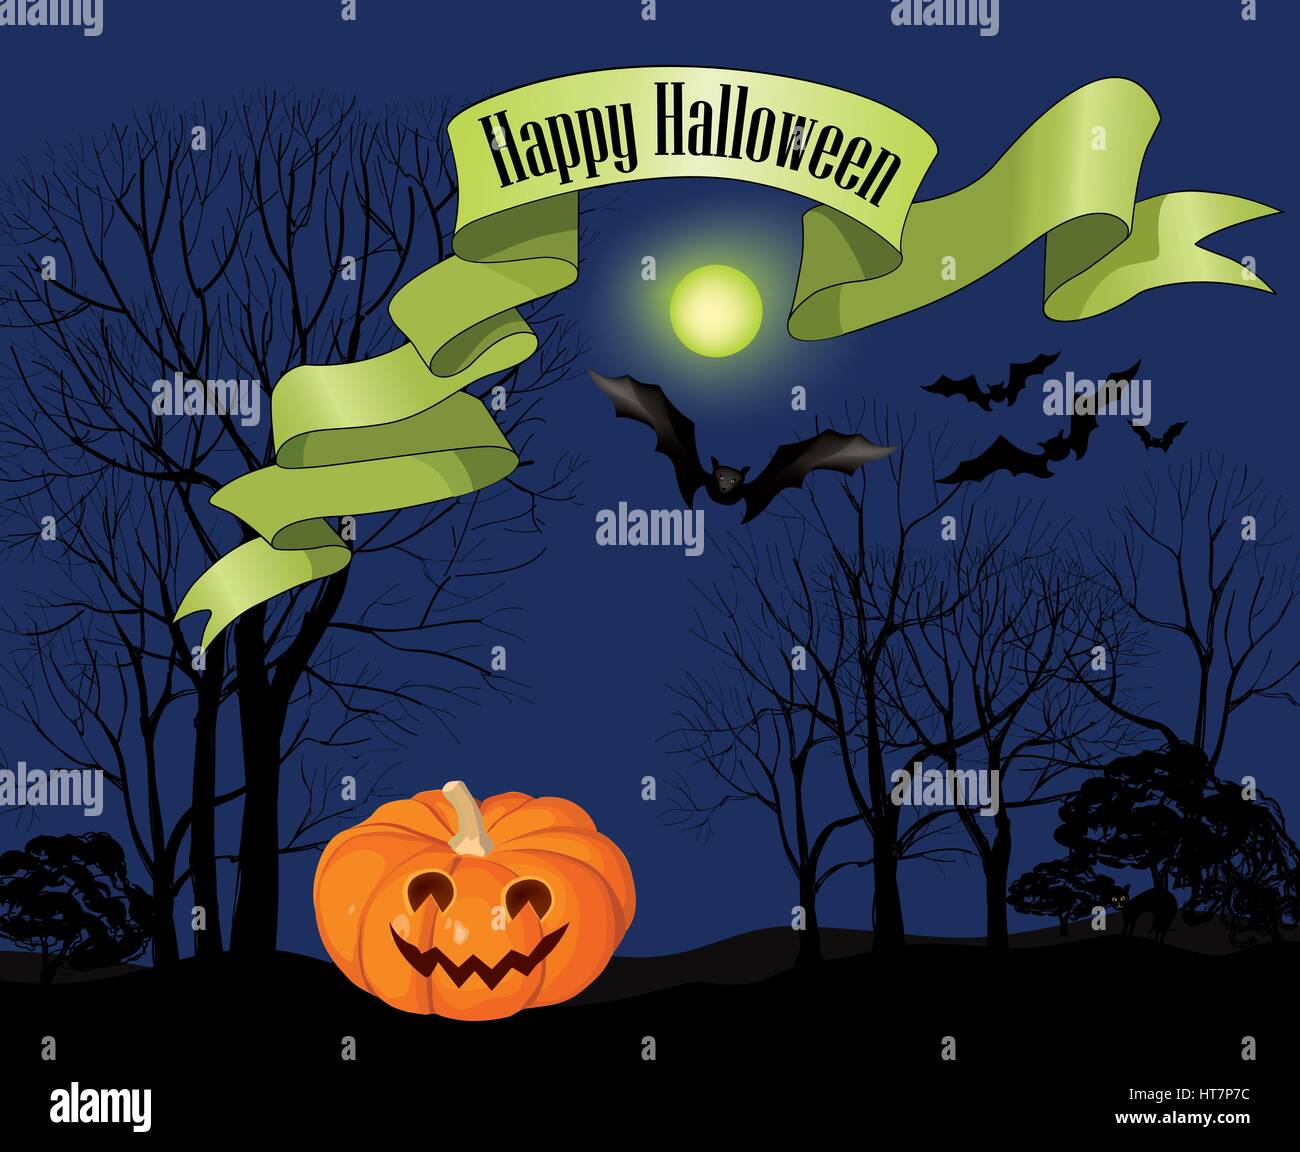 Halloween greeting card. Holiday Halloween landscape background Stock Vector